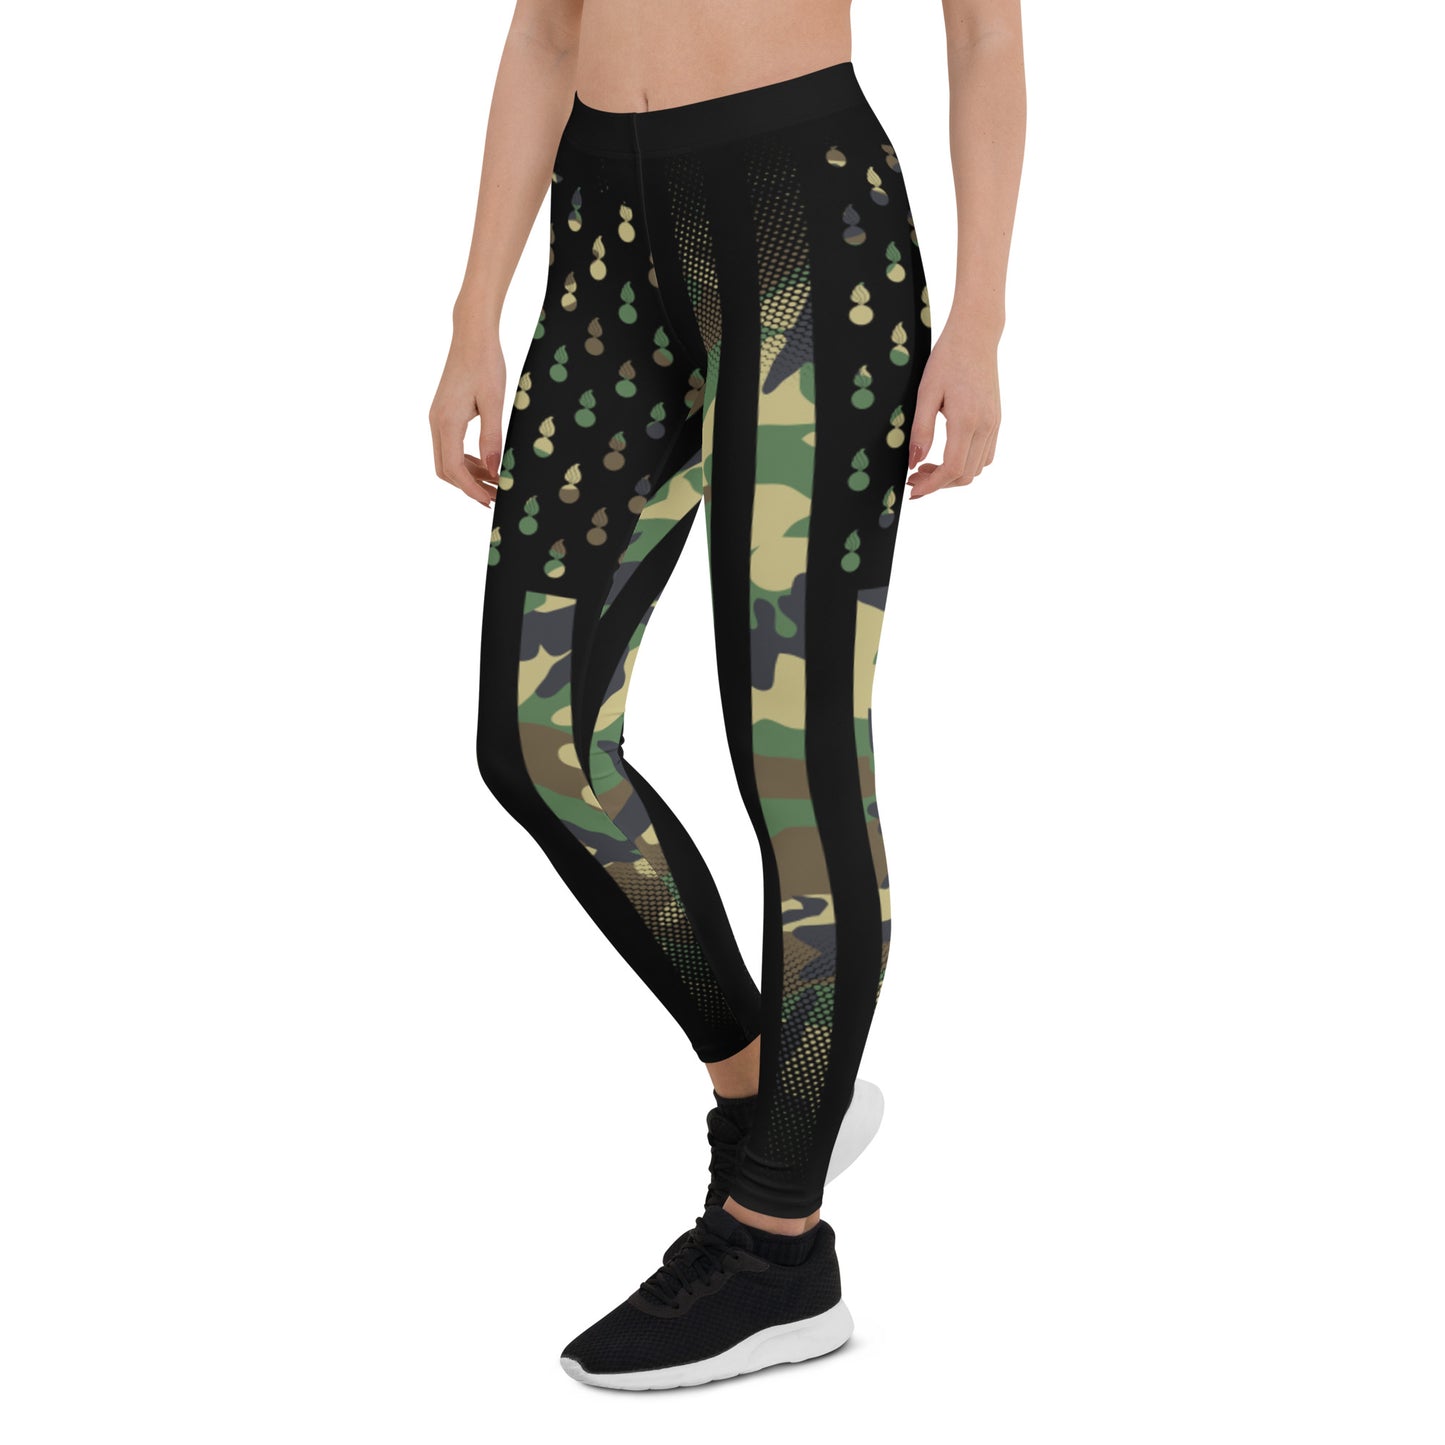 AMMO Black American Flag With Pisspots For Stars BDU Camouflage Pattern Leggings